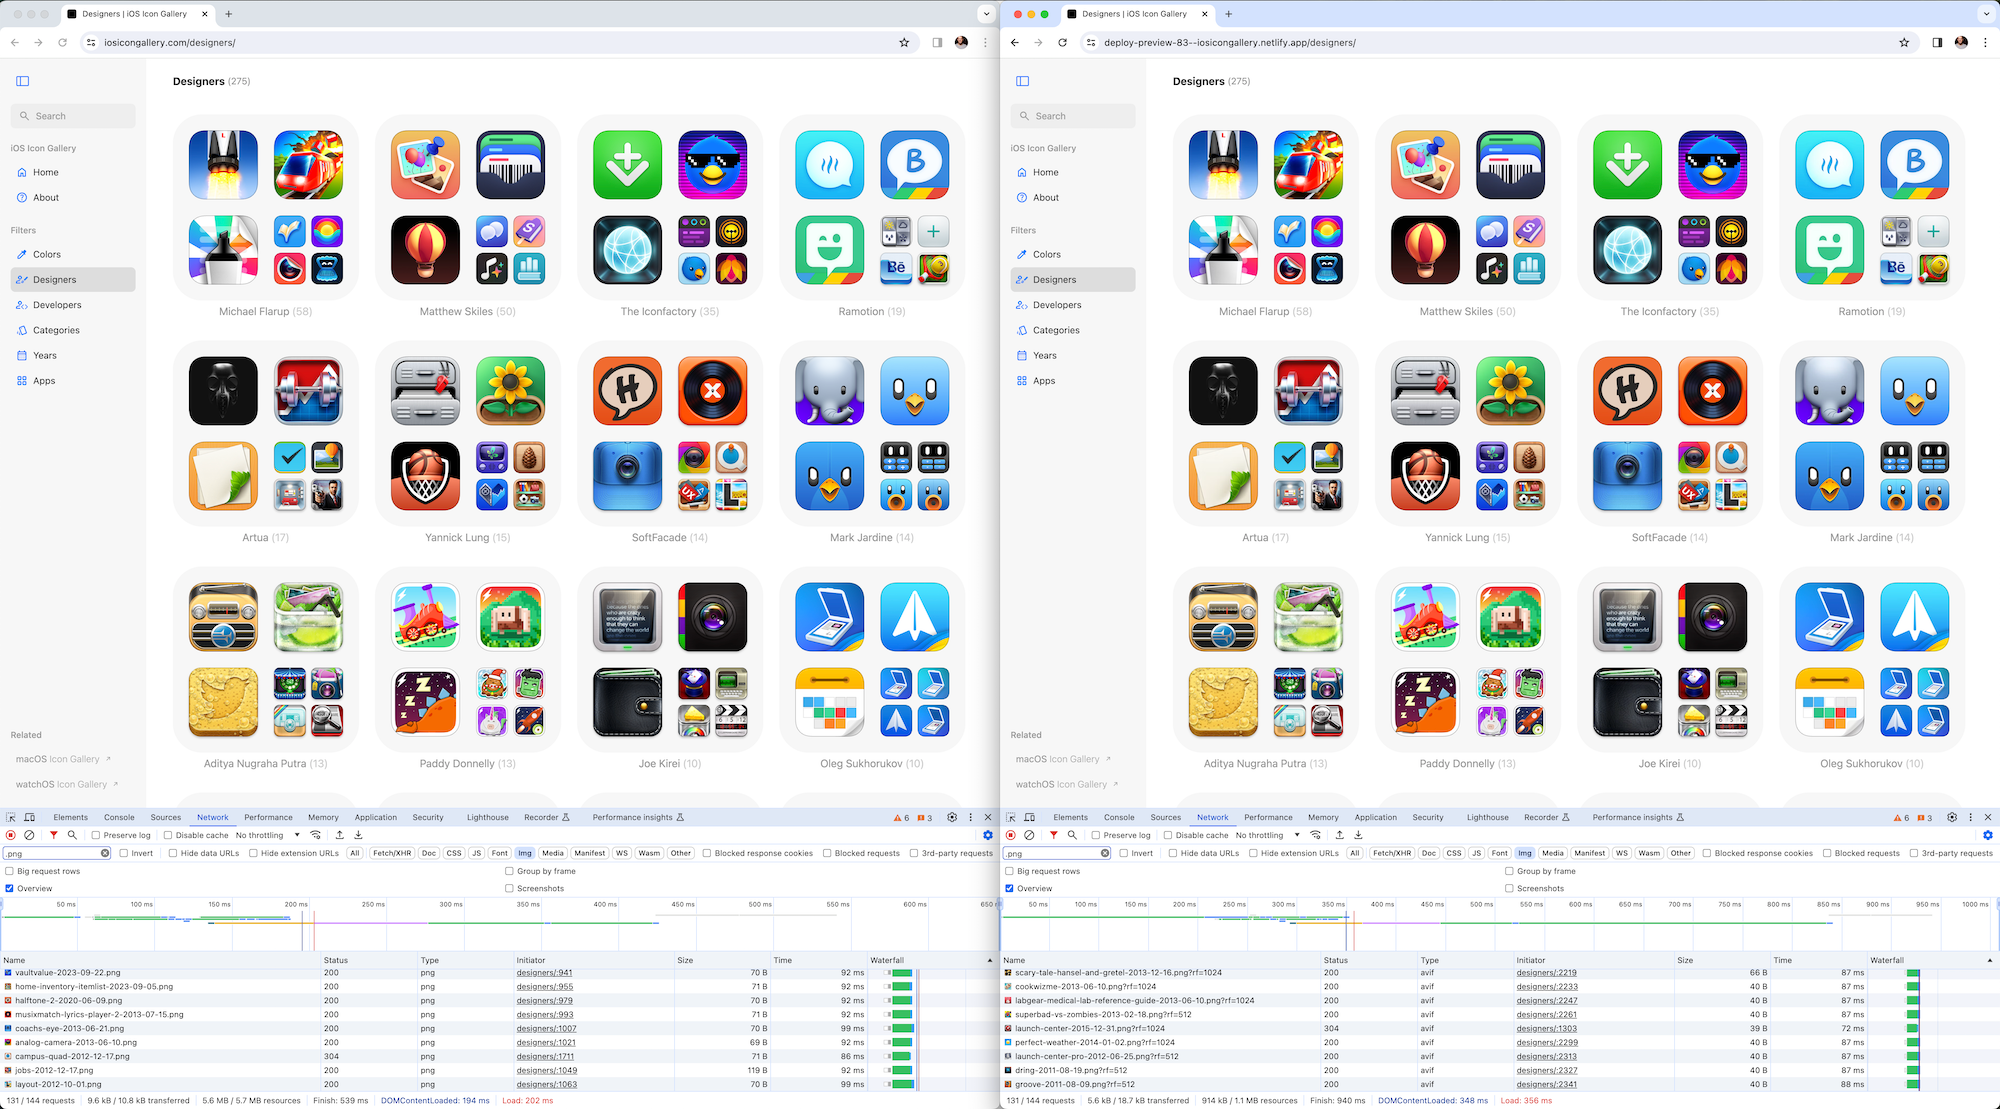 A side-by-side screenshot of the designers index page for iOS Icon Gallery. On the left is the “old” page and on the right is the “new” page. Both websites look the same, but both also have the developer tools open and show a drastic drop in overall resources loaded.